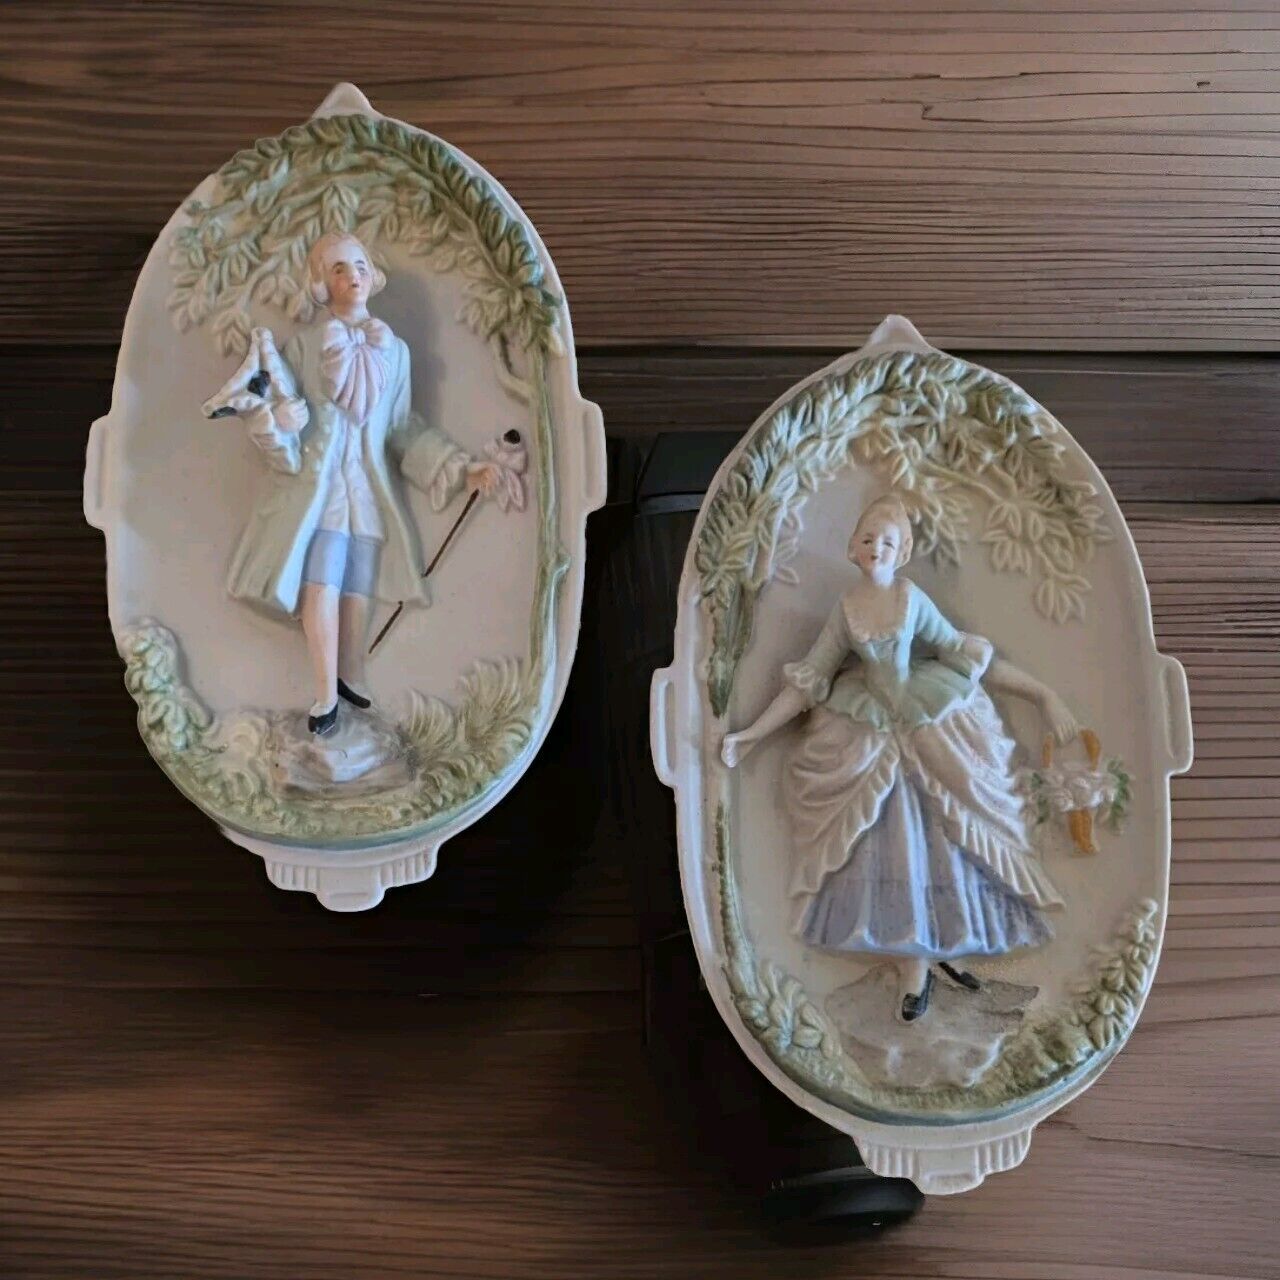 VTG 2 Hand Painted Porcelain Bisque Plaques - By Chase- Made in Occupied Japan